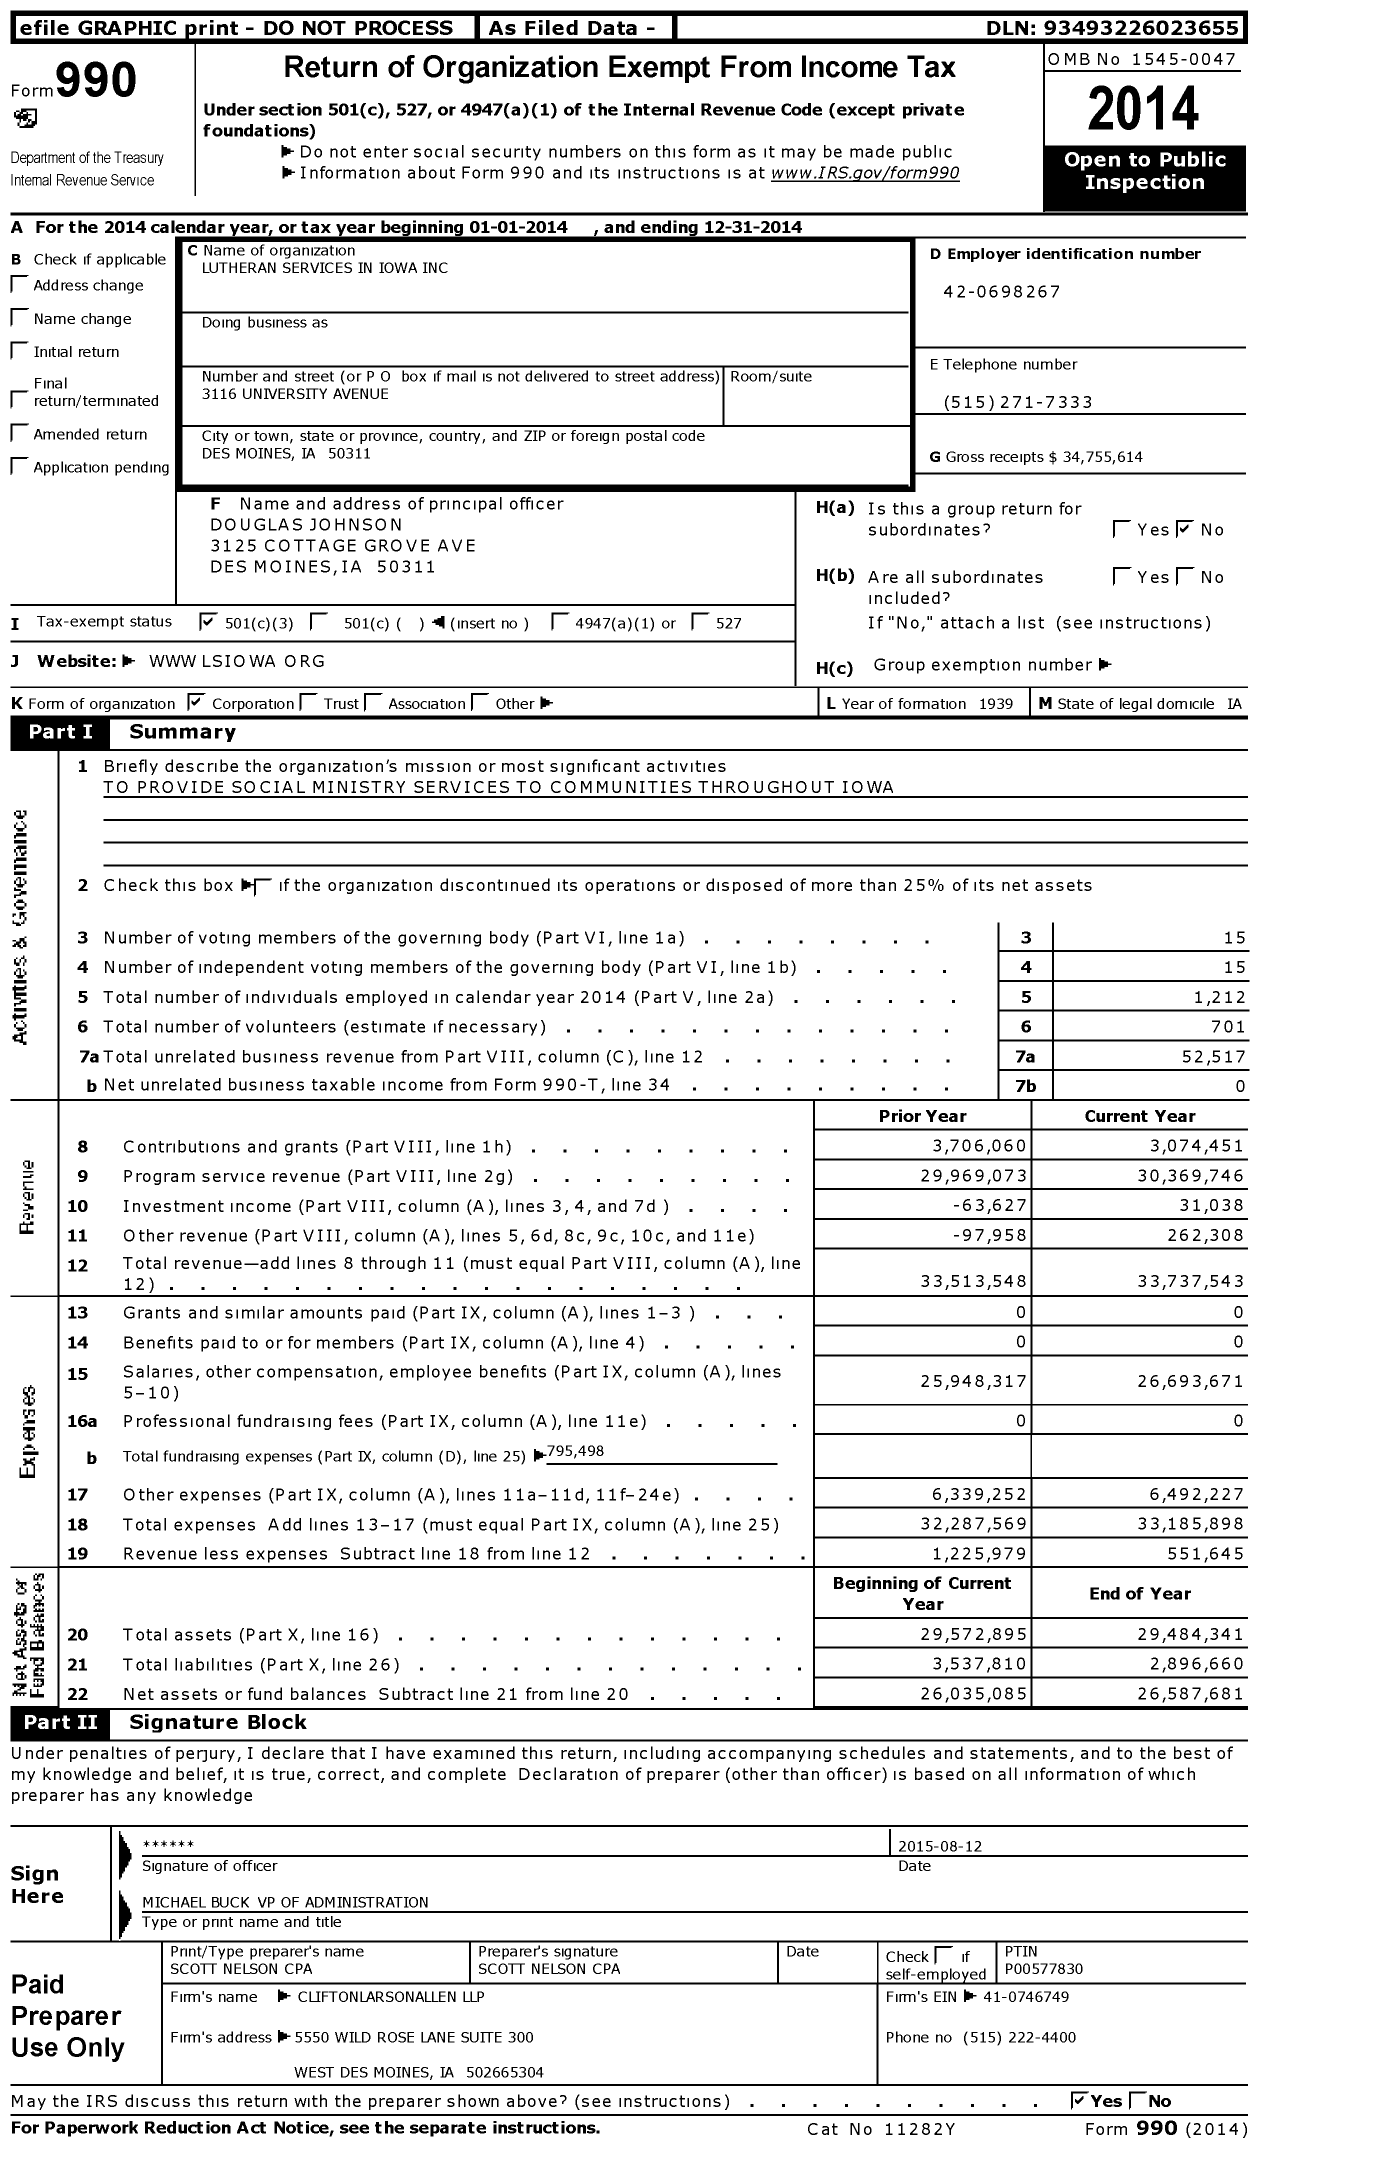 Image of first page of 2014 Form 990 for Lutheran Services in Iowa (LSI)